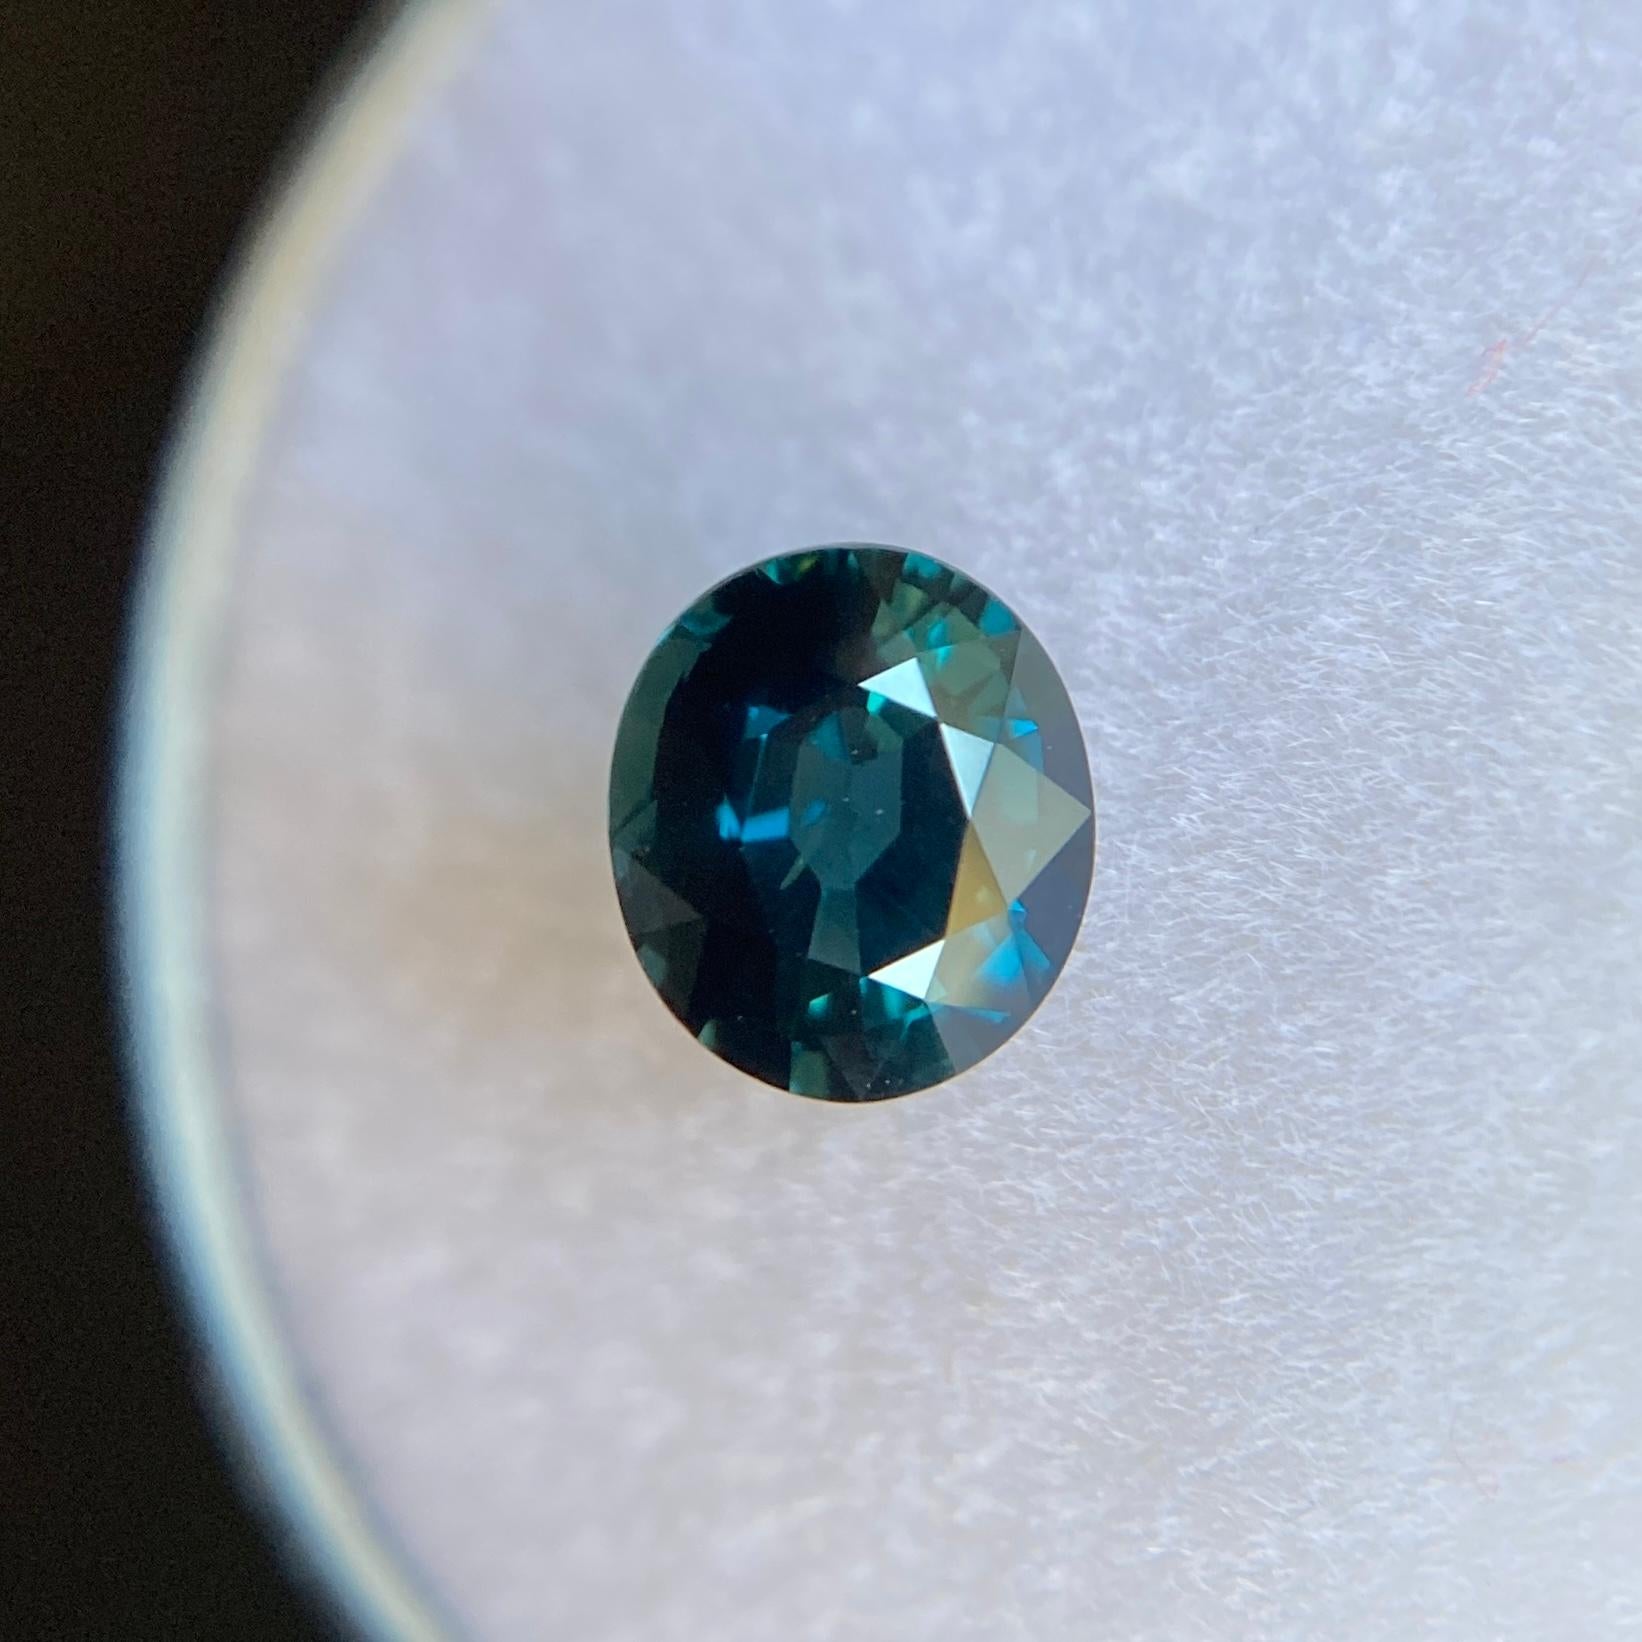 Fine Blue Green Untreated Sapphire Gemstone.

Fine quality unheated sapphire with a beautiful vivid blue green colour.

Fully certified by GIA confirming stone as natural and untreated. Very rare for natural sapphires.

1.03 Carat with excellent